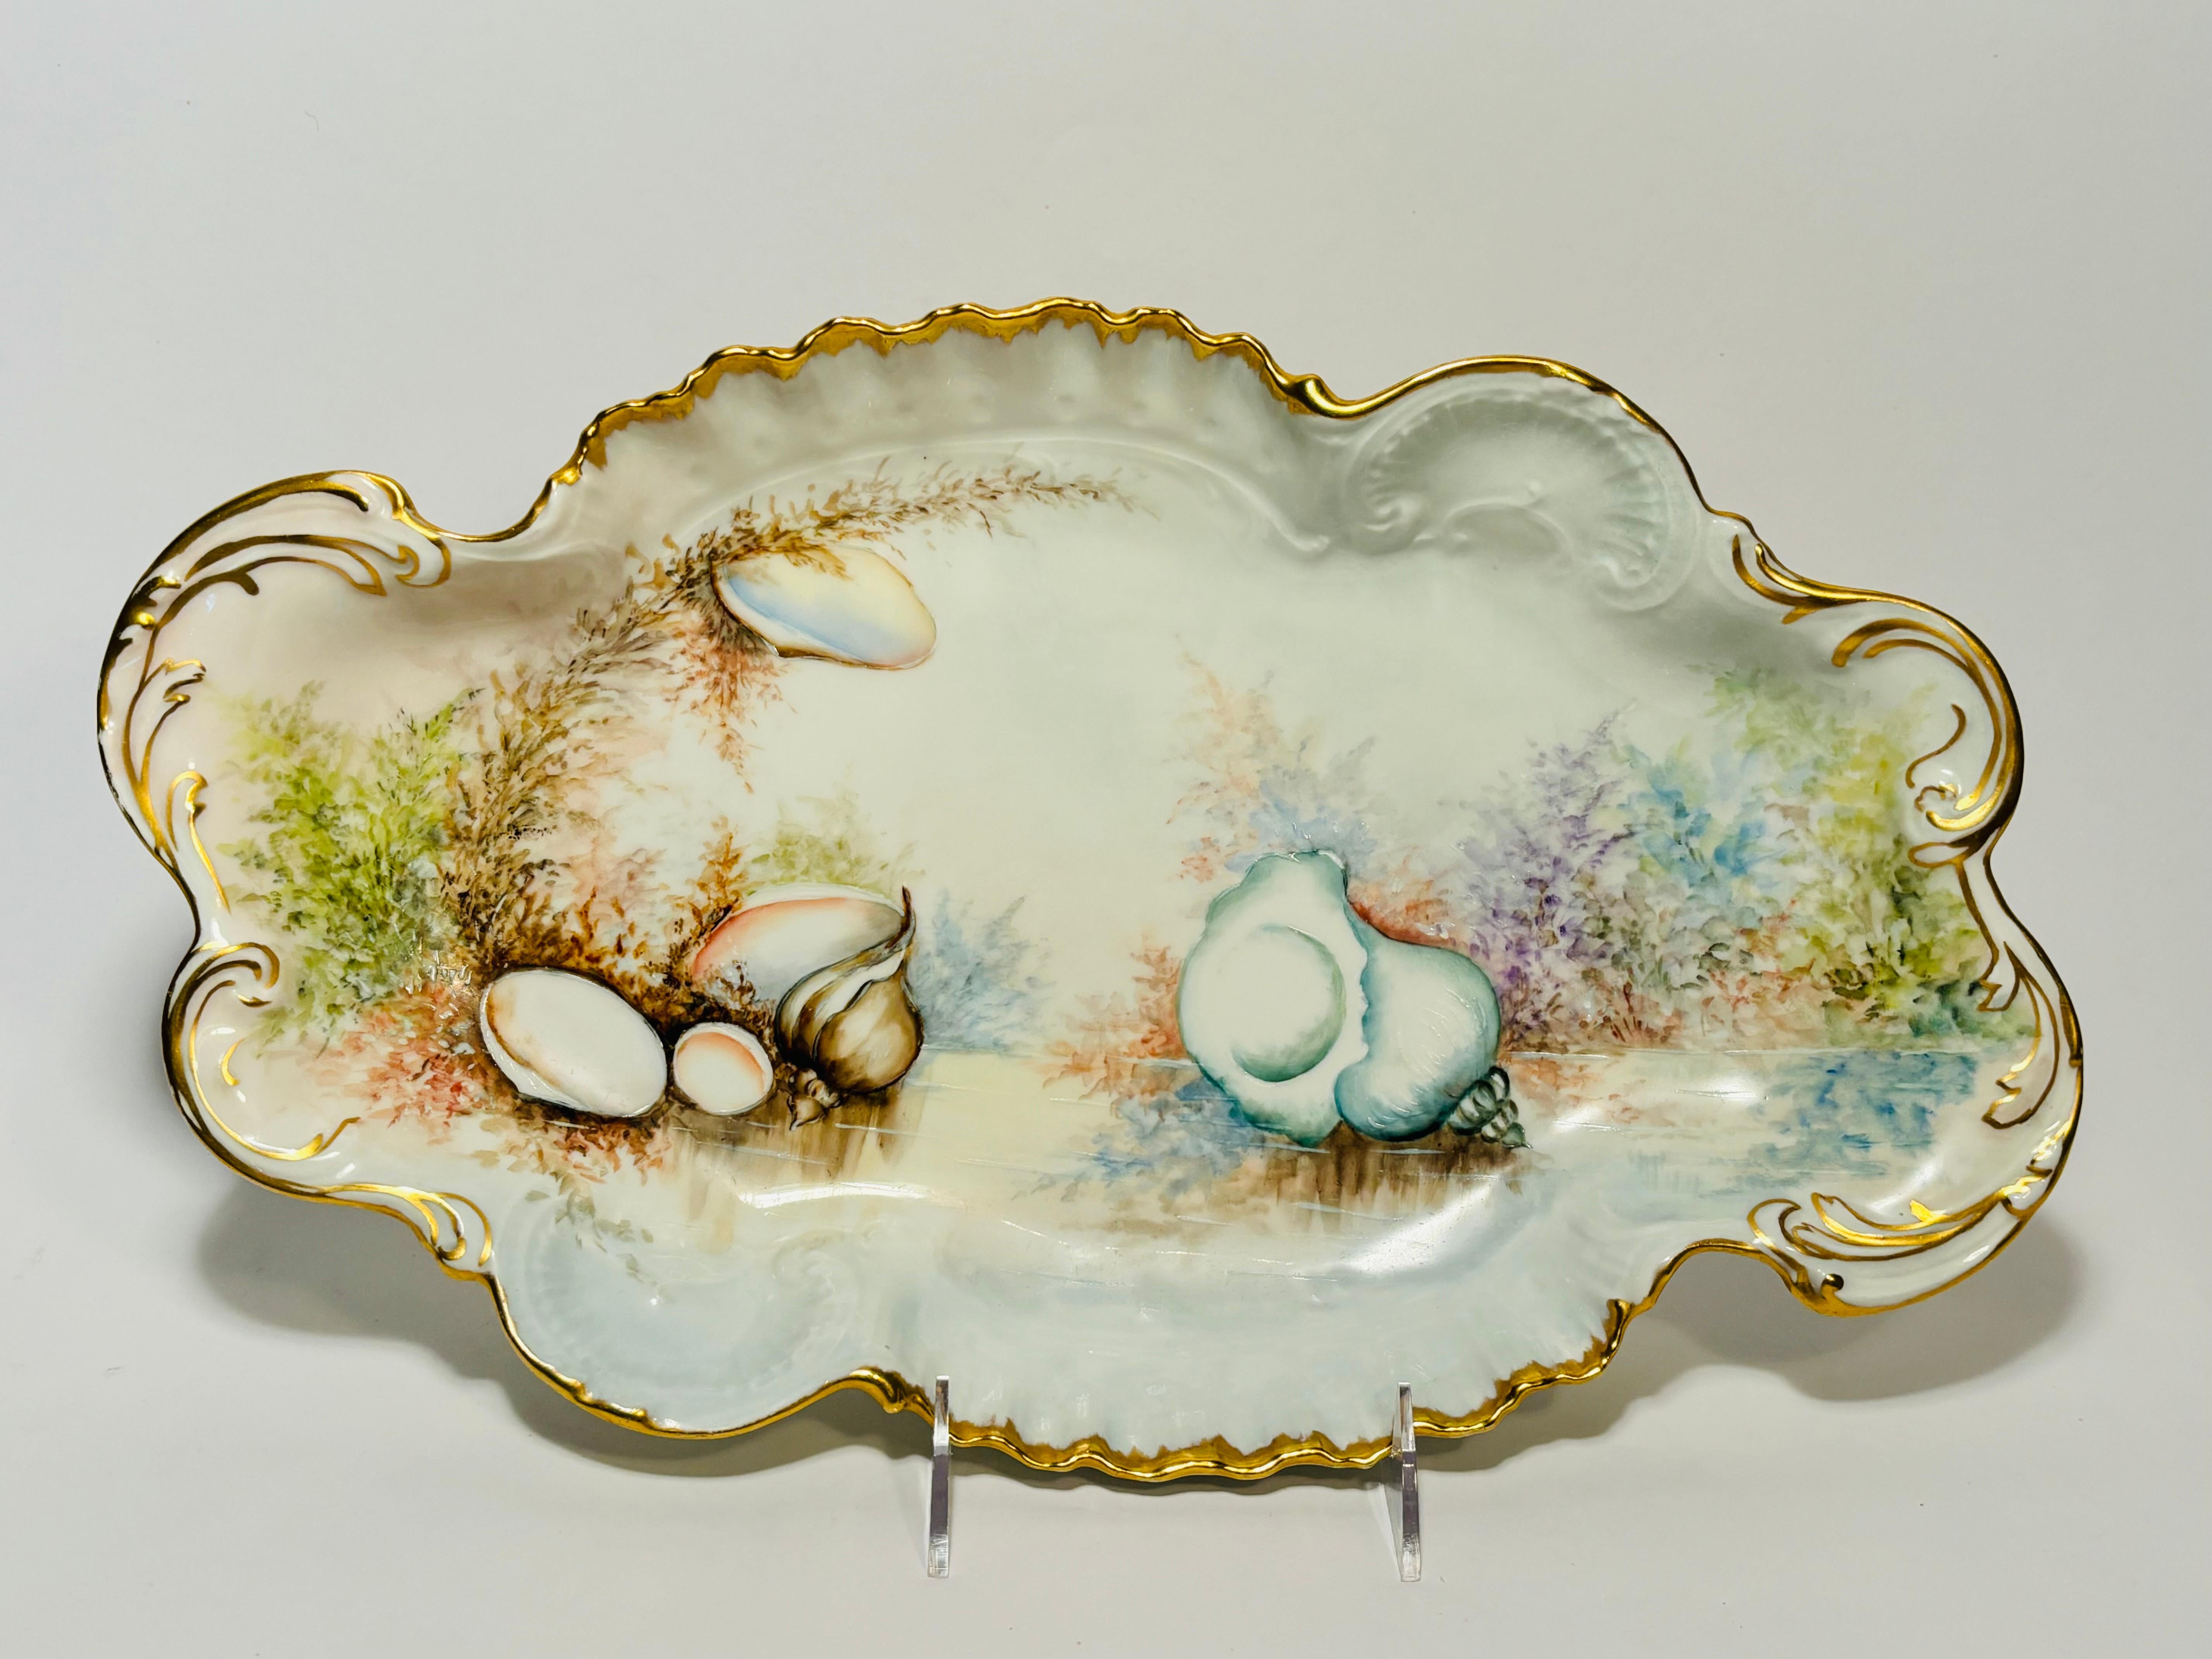 A lovely centerpiece for your display and a nice sized serving platter featuring a scalloped shape with impressed shell cartouches in the porcelain blank. Trimmed in 24 karat gold and nicely hand painted all over with realistic shells and vibrant